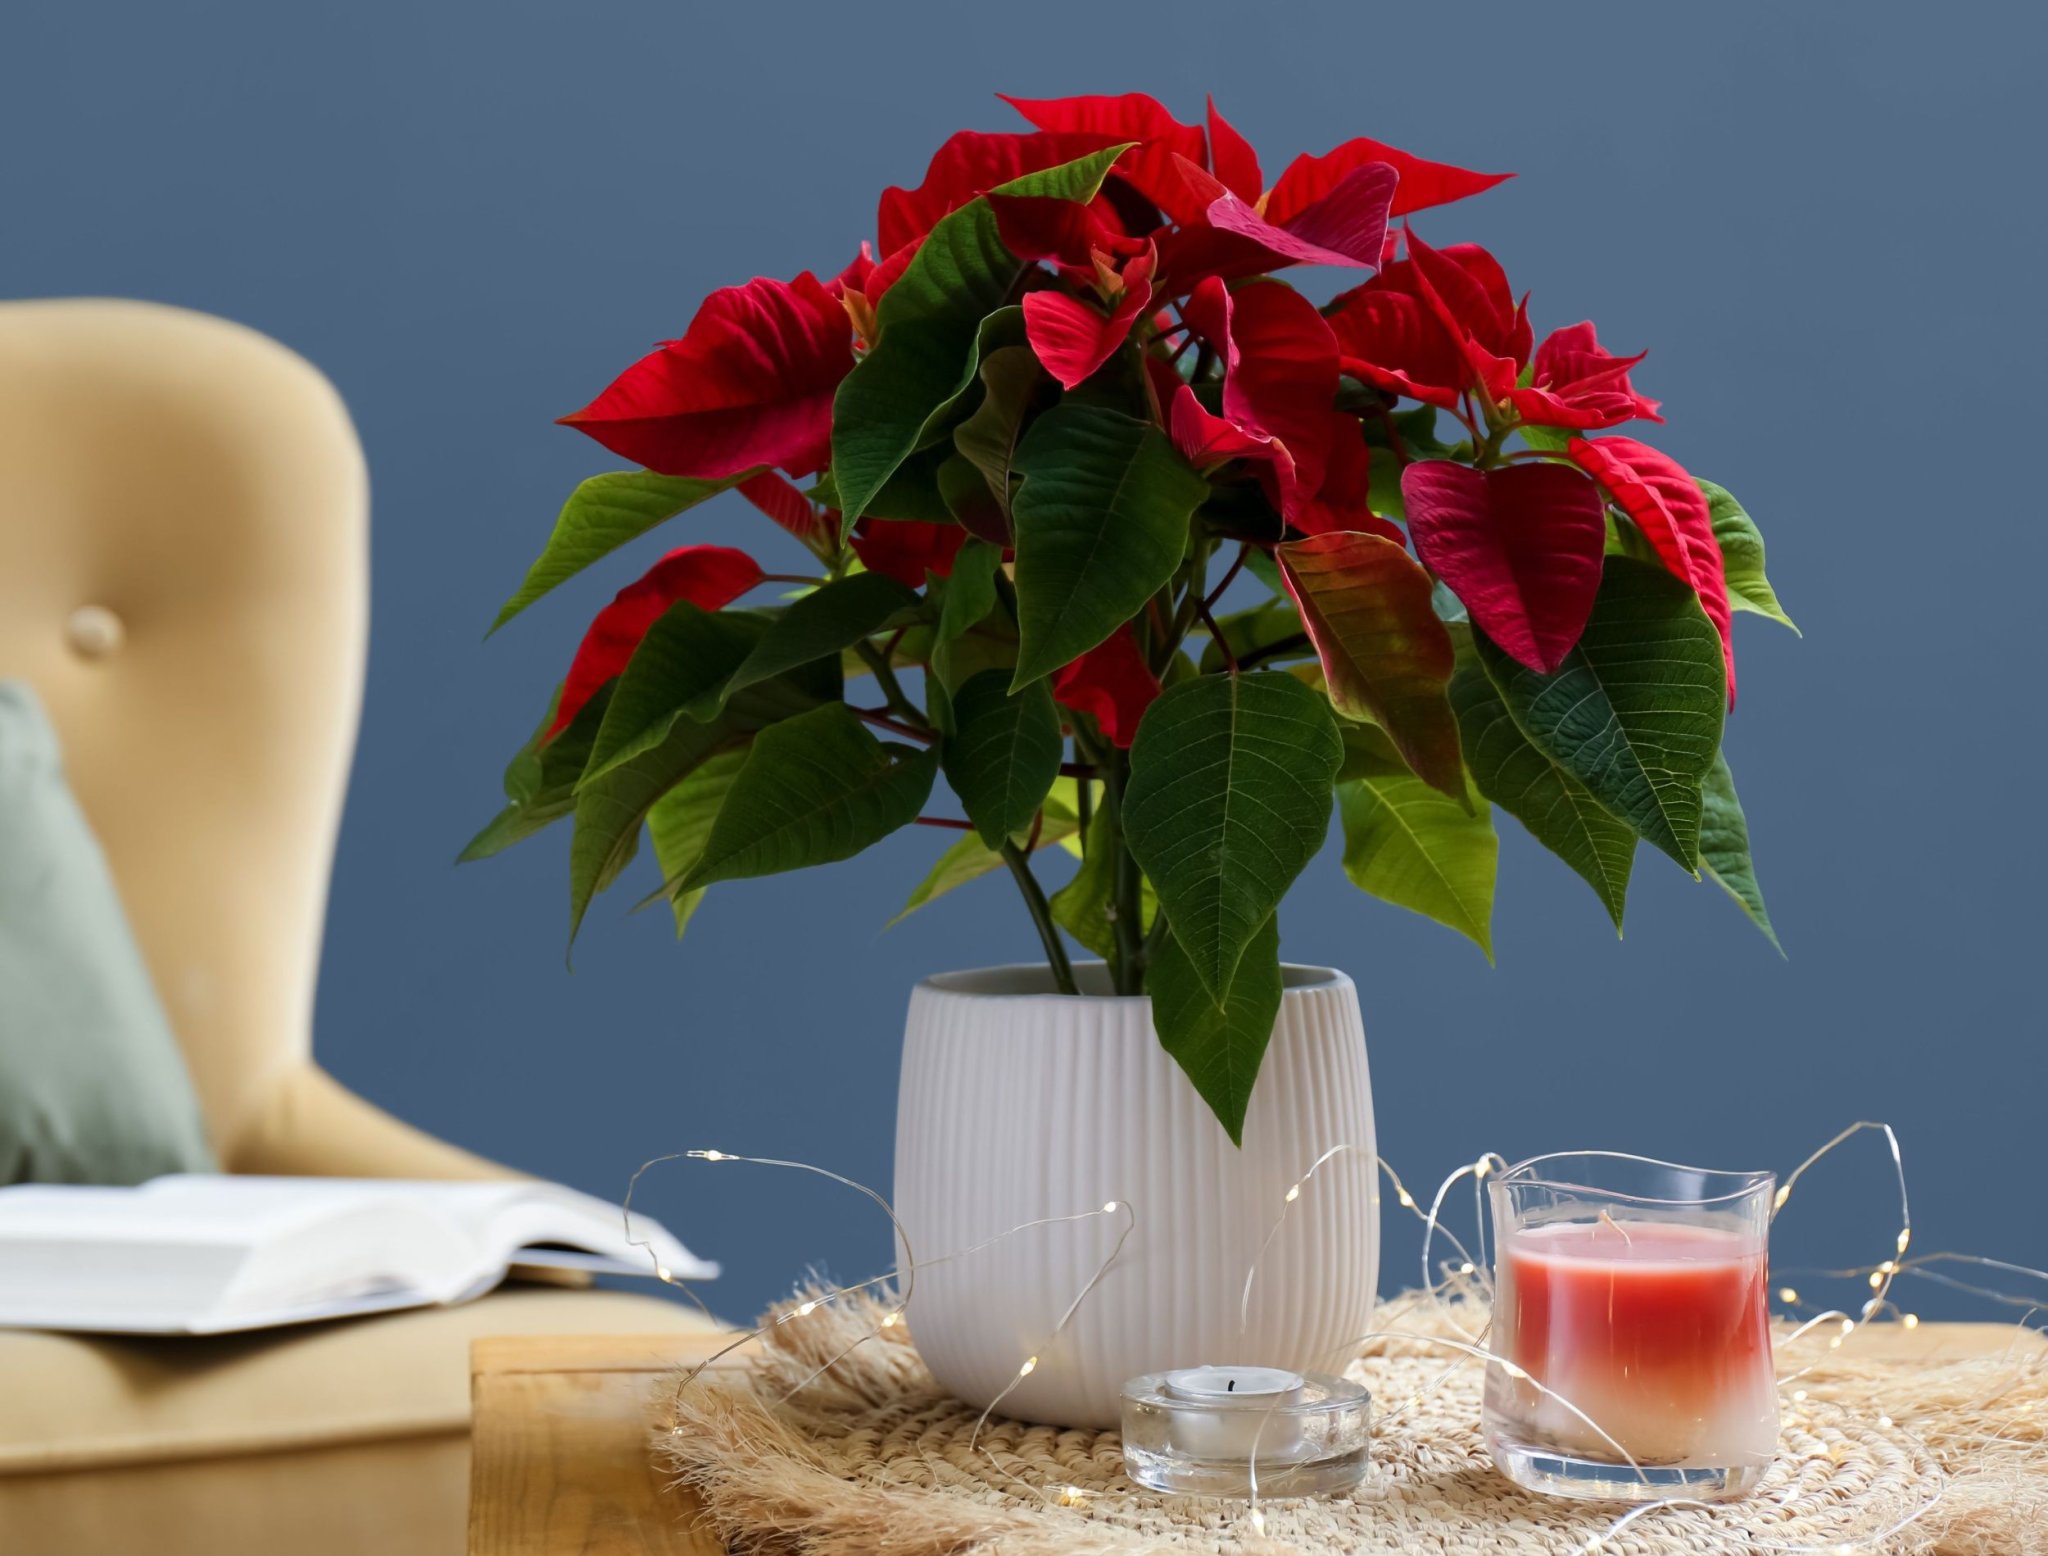 How To Make Your Poinsettia Turn Red